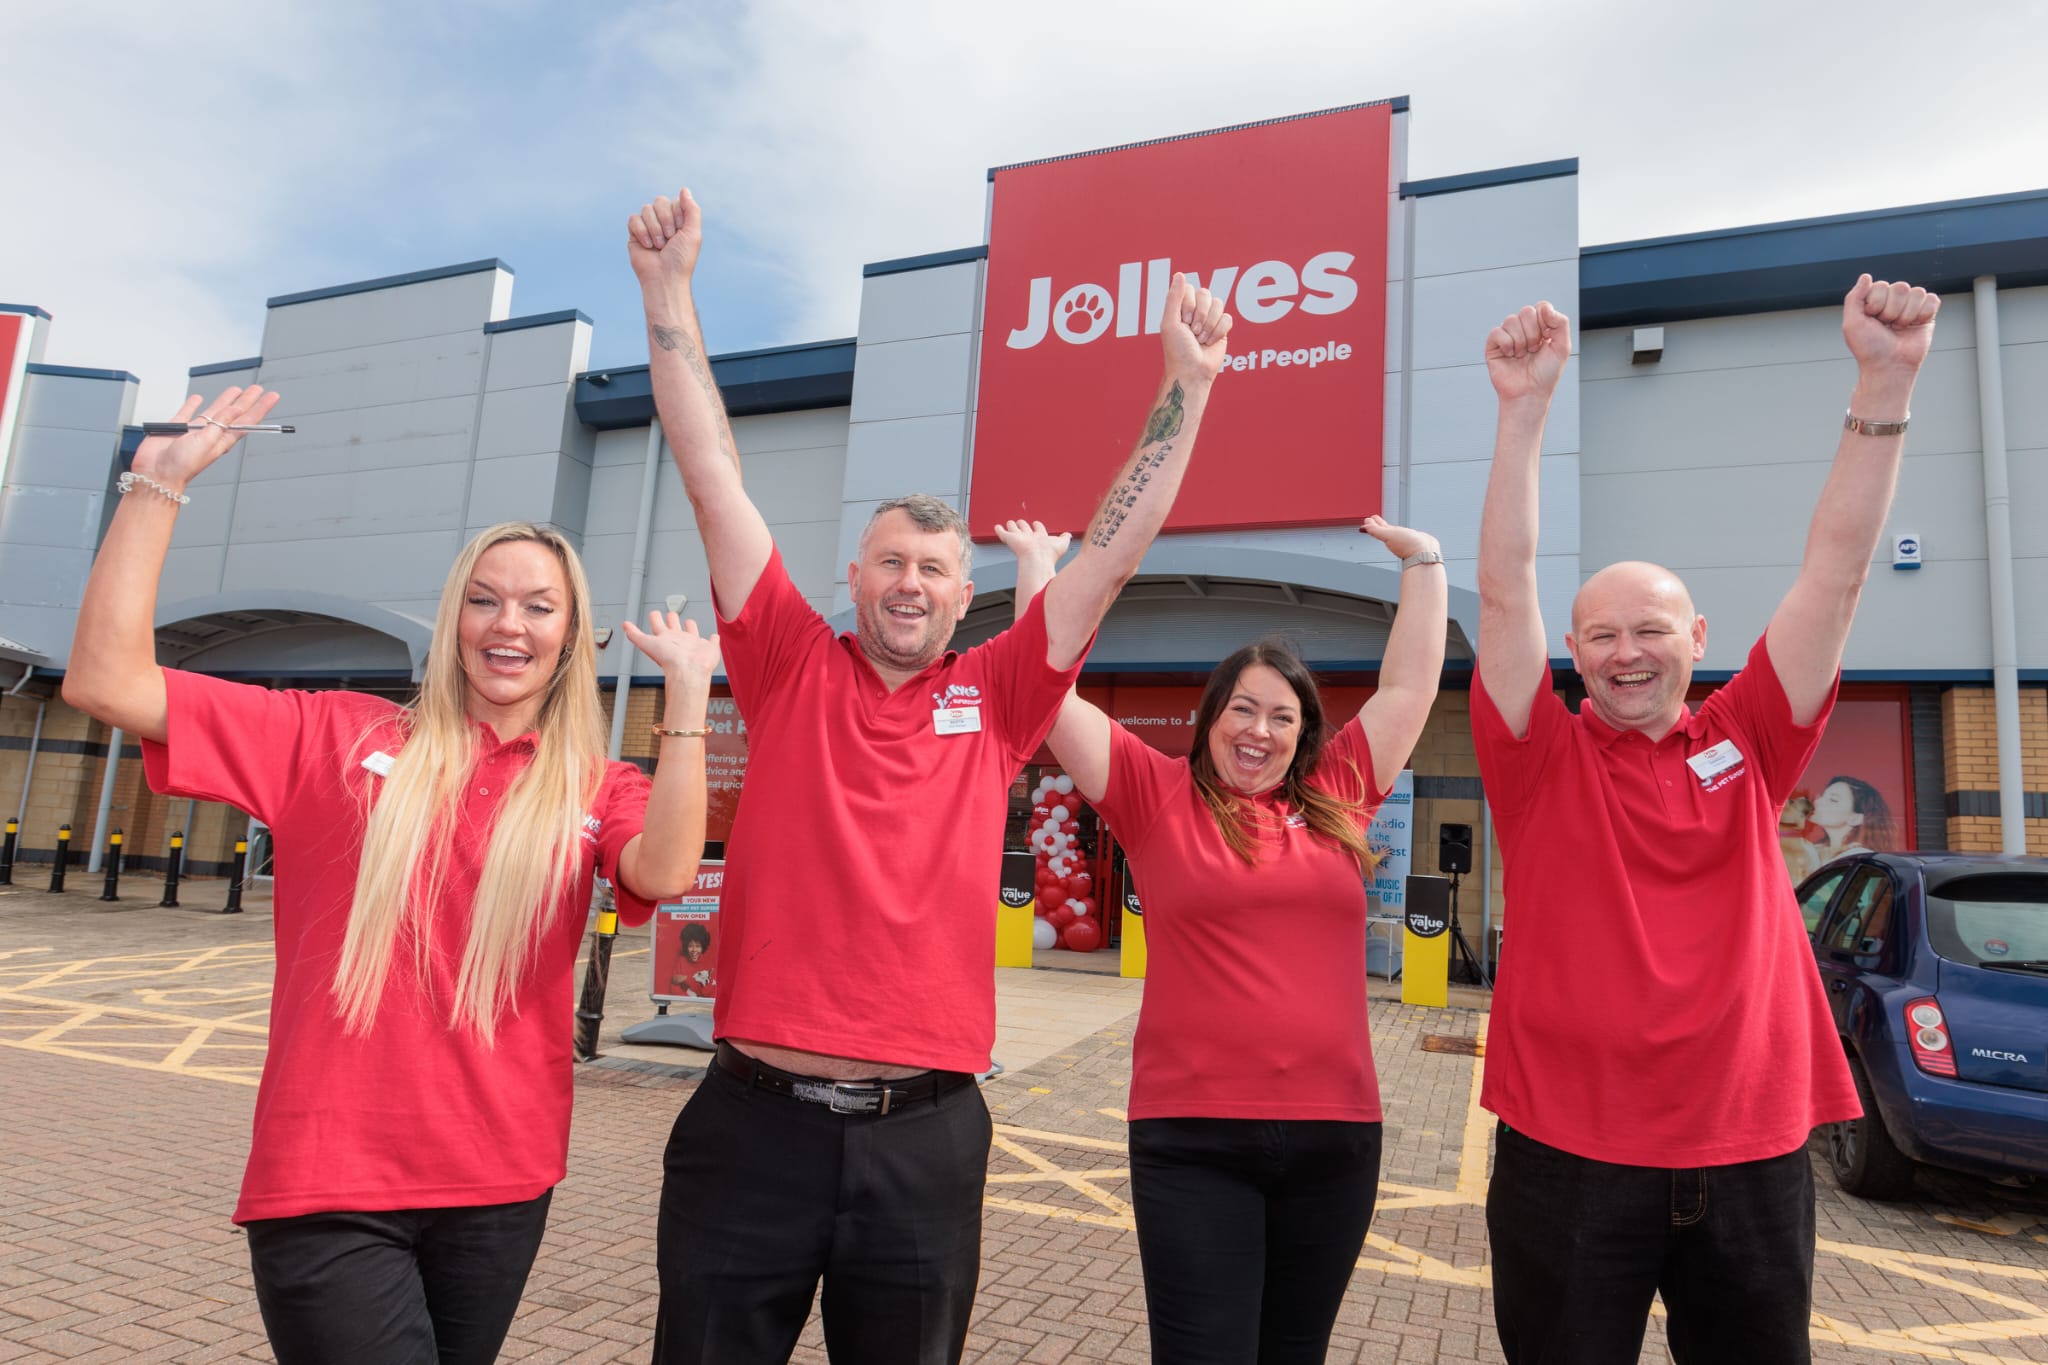 The new Jollyes pet store has opened at Kew Retail Park in Southport.